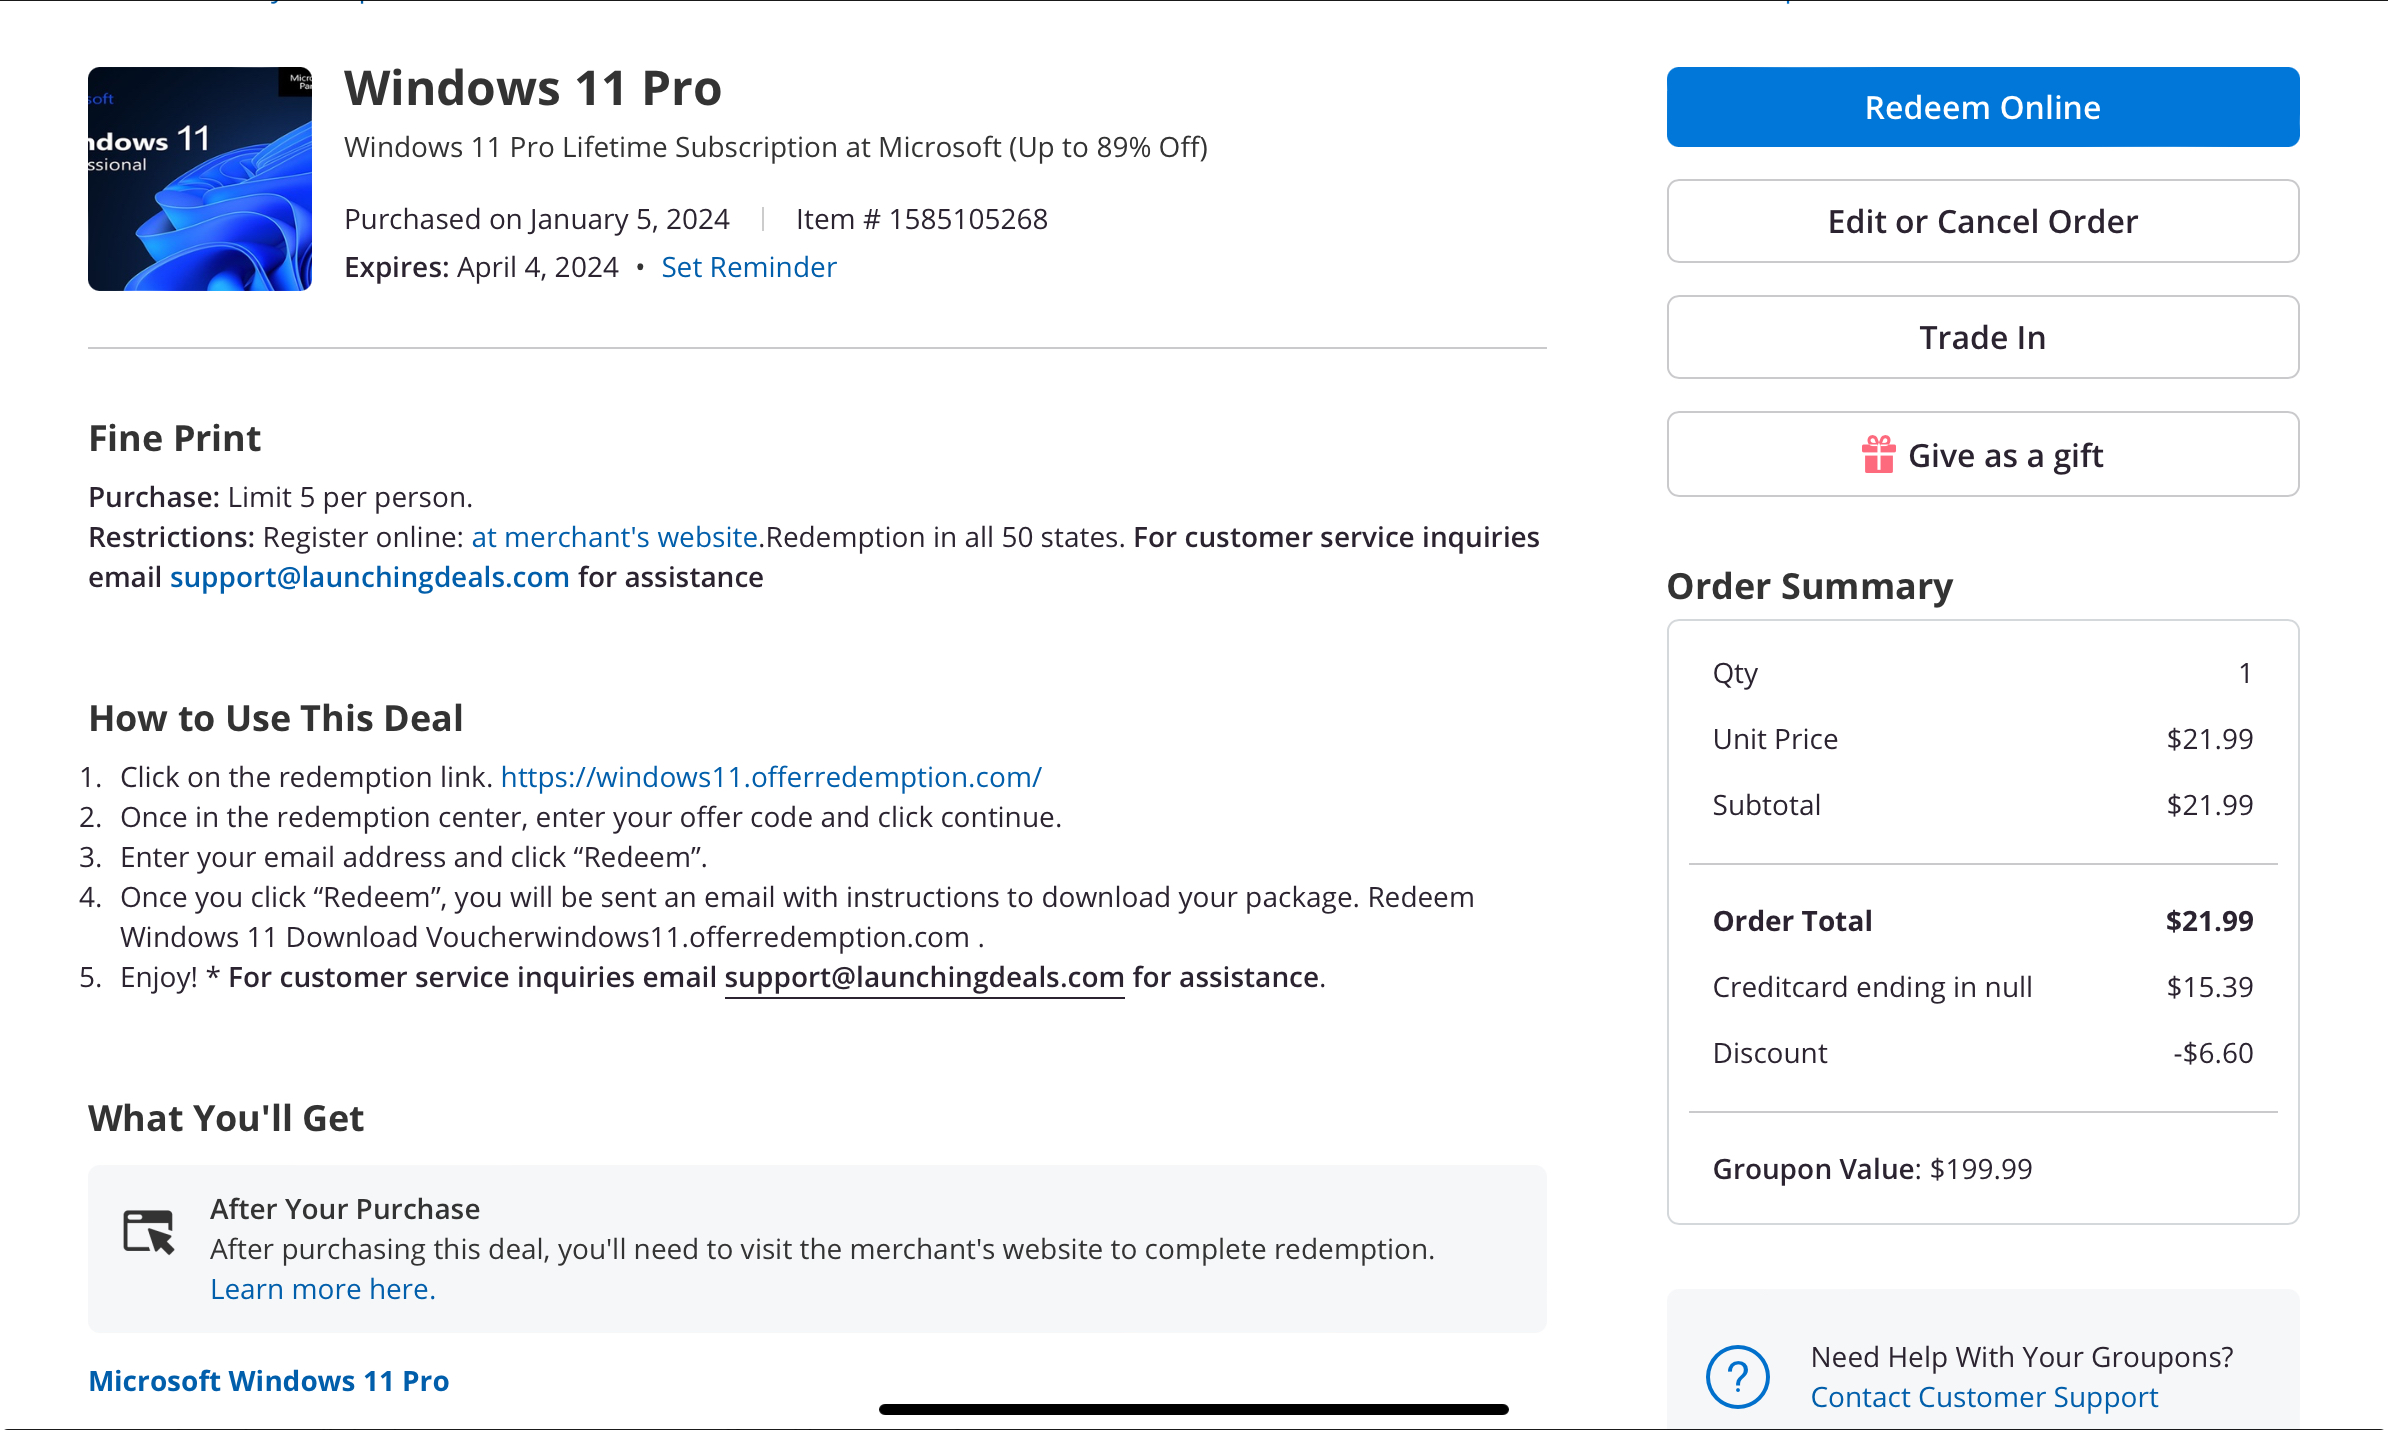 Buy and Download Windows 11 Pro